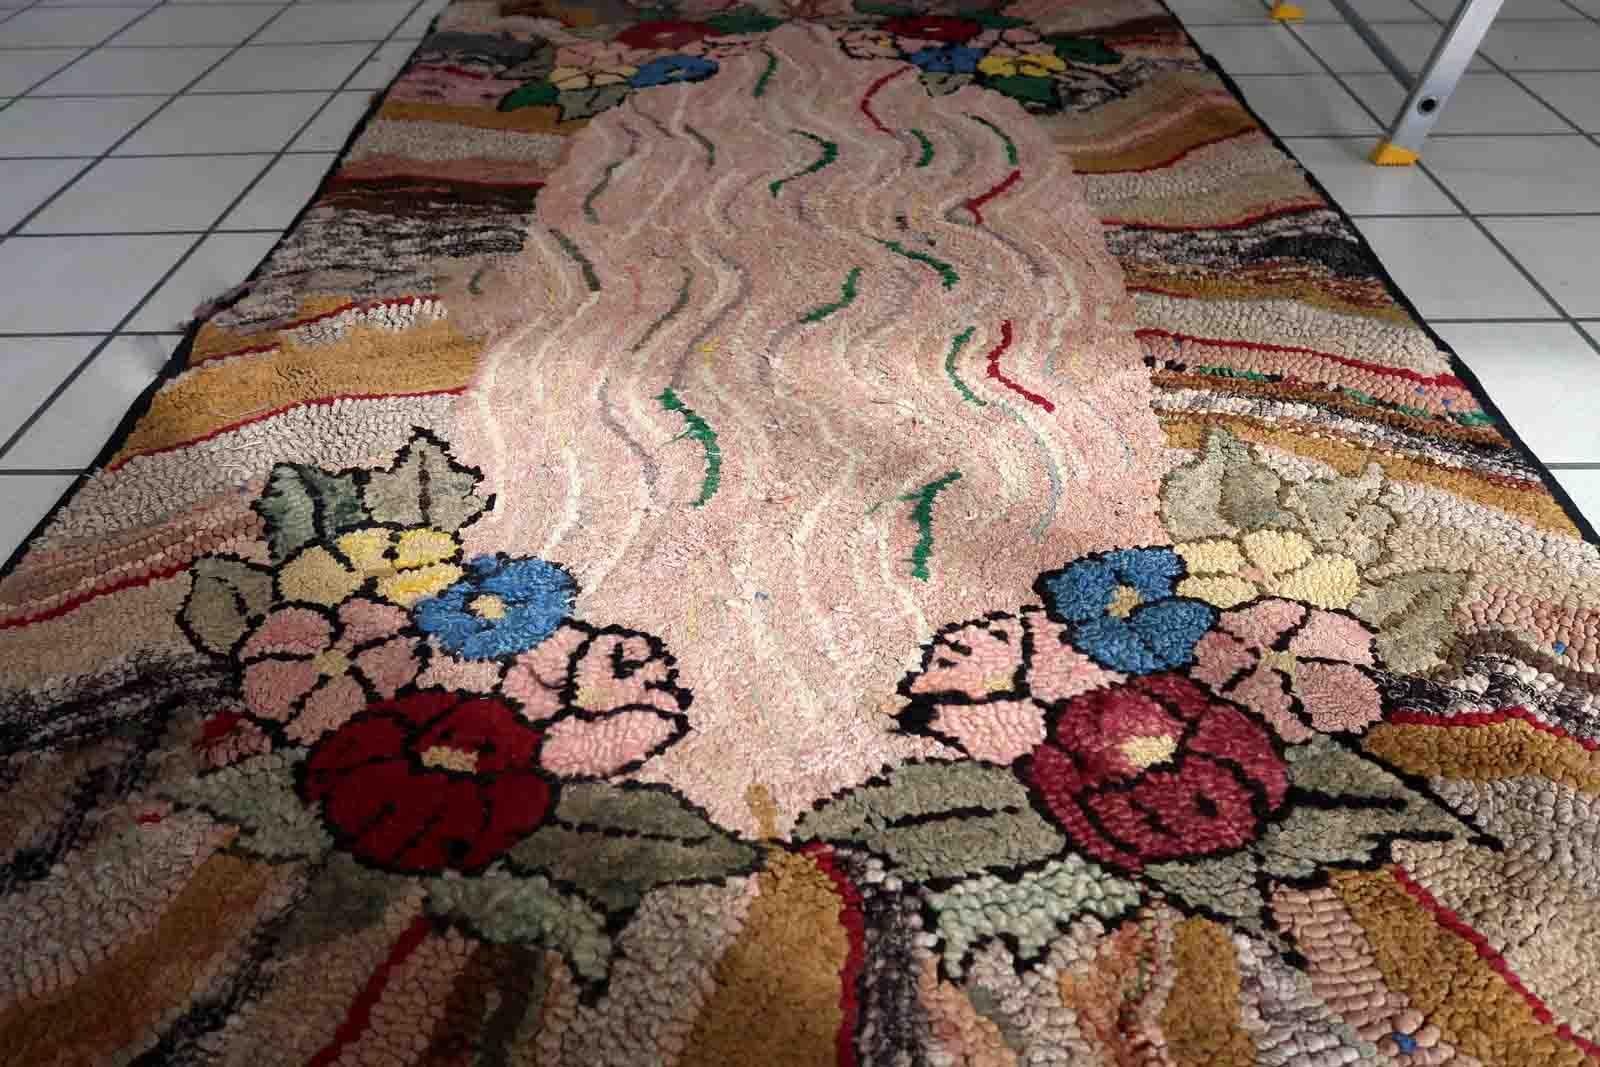 Handmade antique American Hooked rug in abstract design. The rug is from the end of 19th century. It is in good condition, has some old restorations.

-condition: restored,

-circa: 1880s,

-size: 3.2' x 5.7' (100cm x 174cm),

-material: